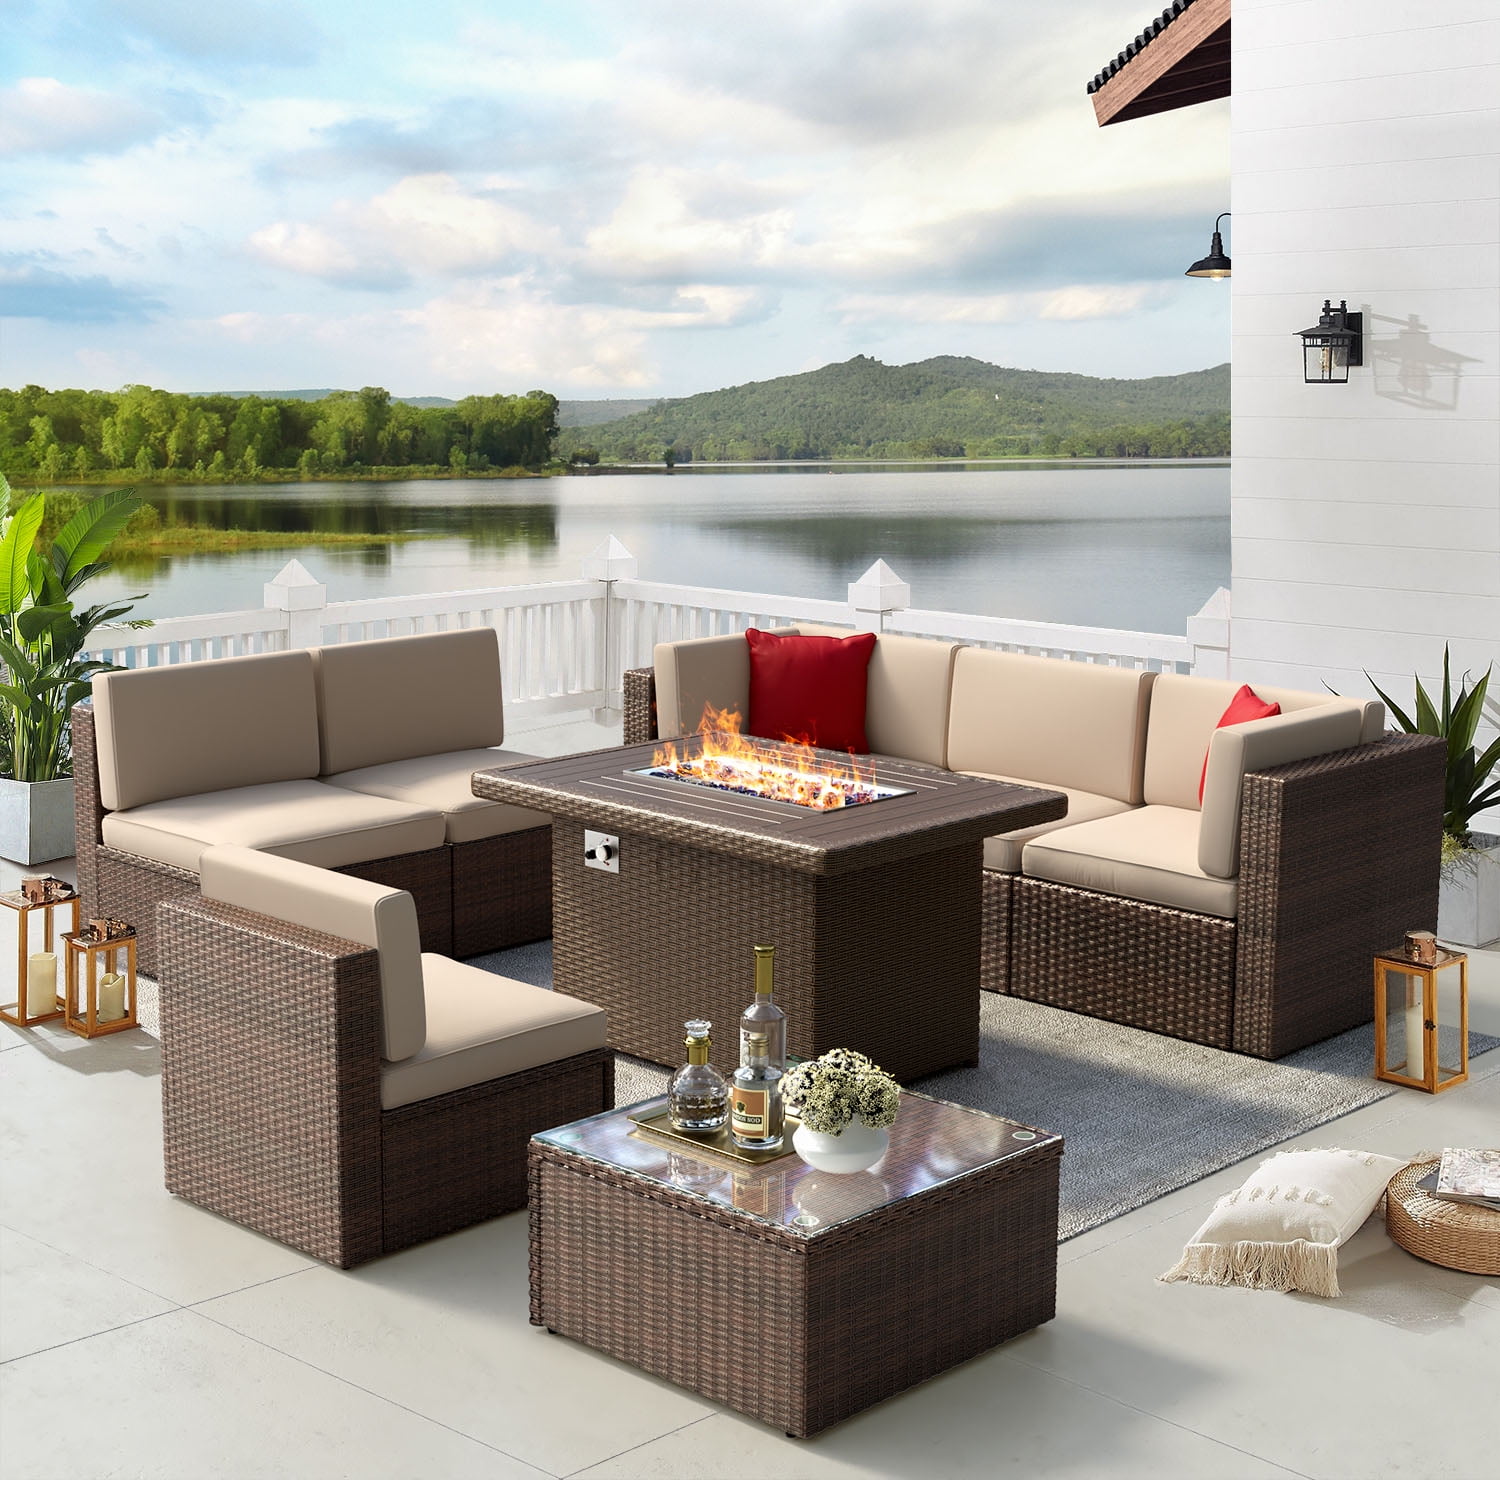 Aoxun 8 Piece Outdoor Patio Furniture Set with 44″ Fire Pit Table